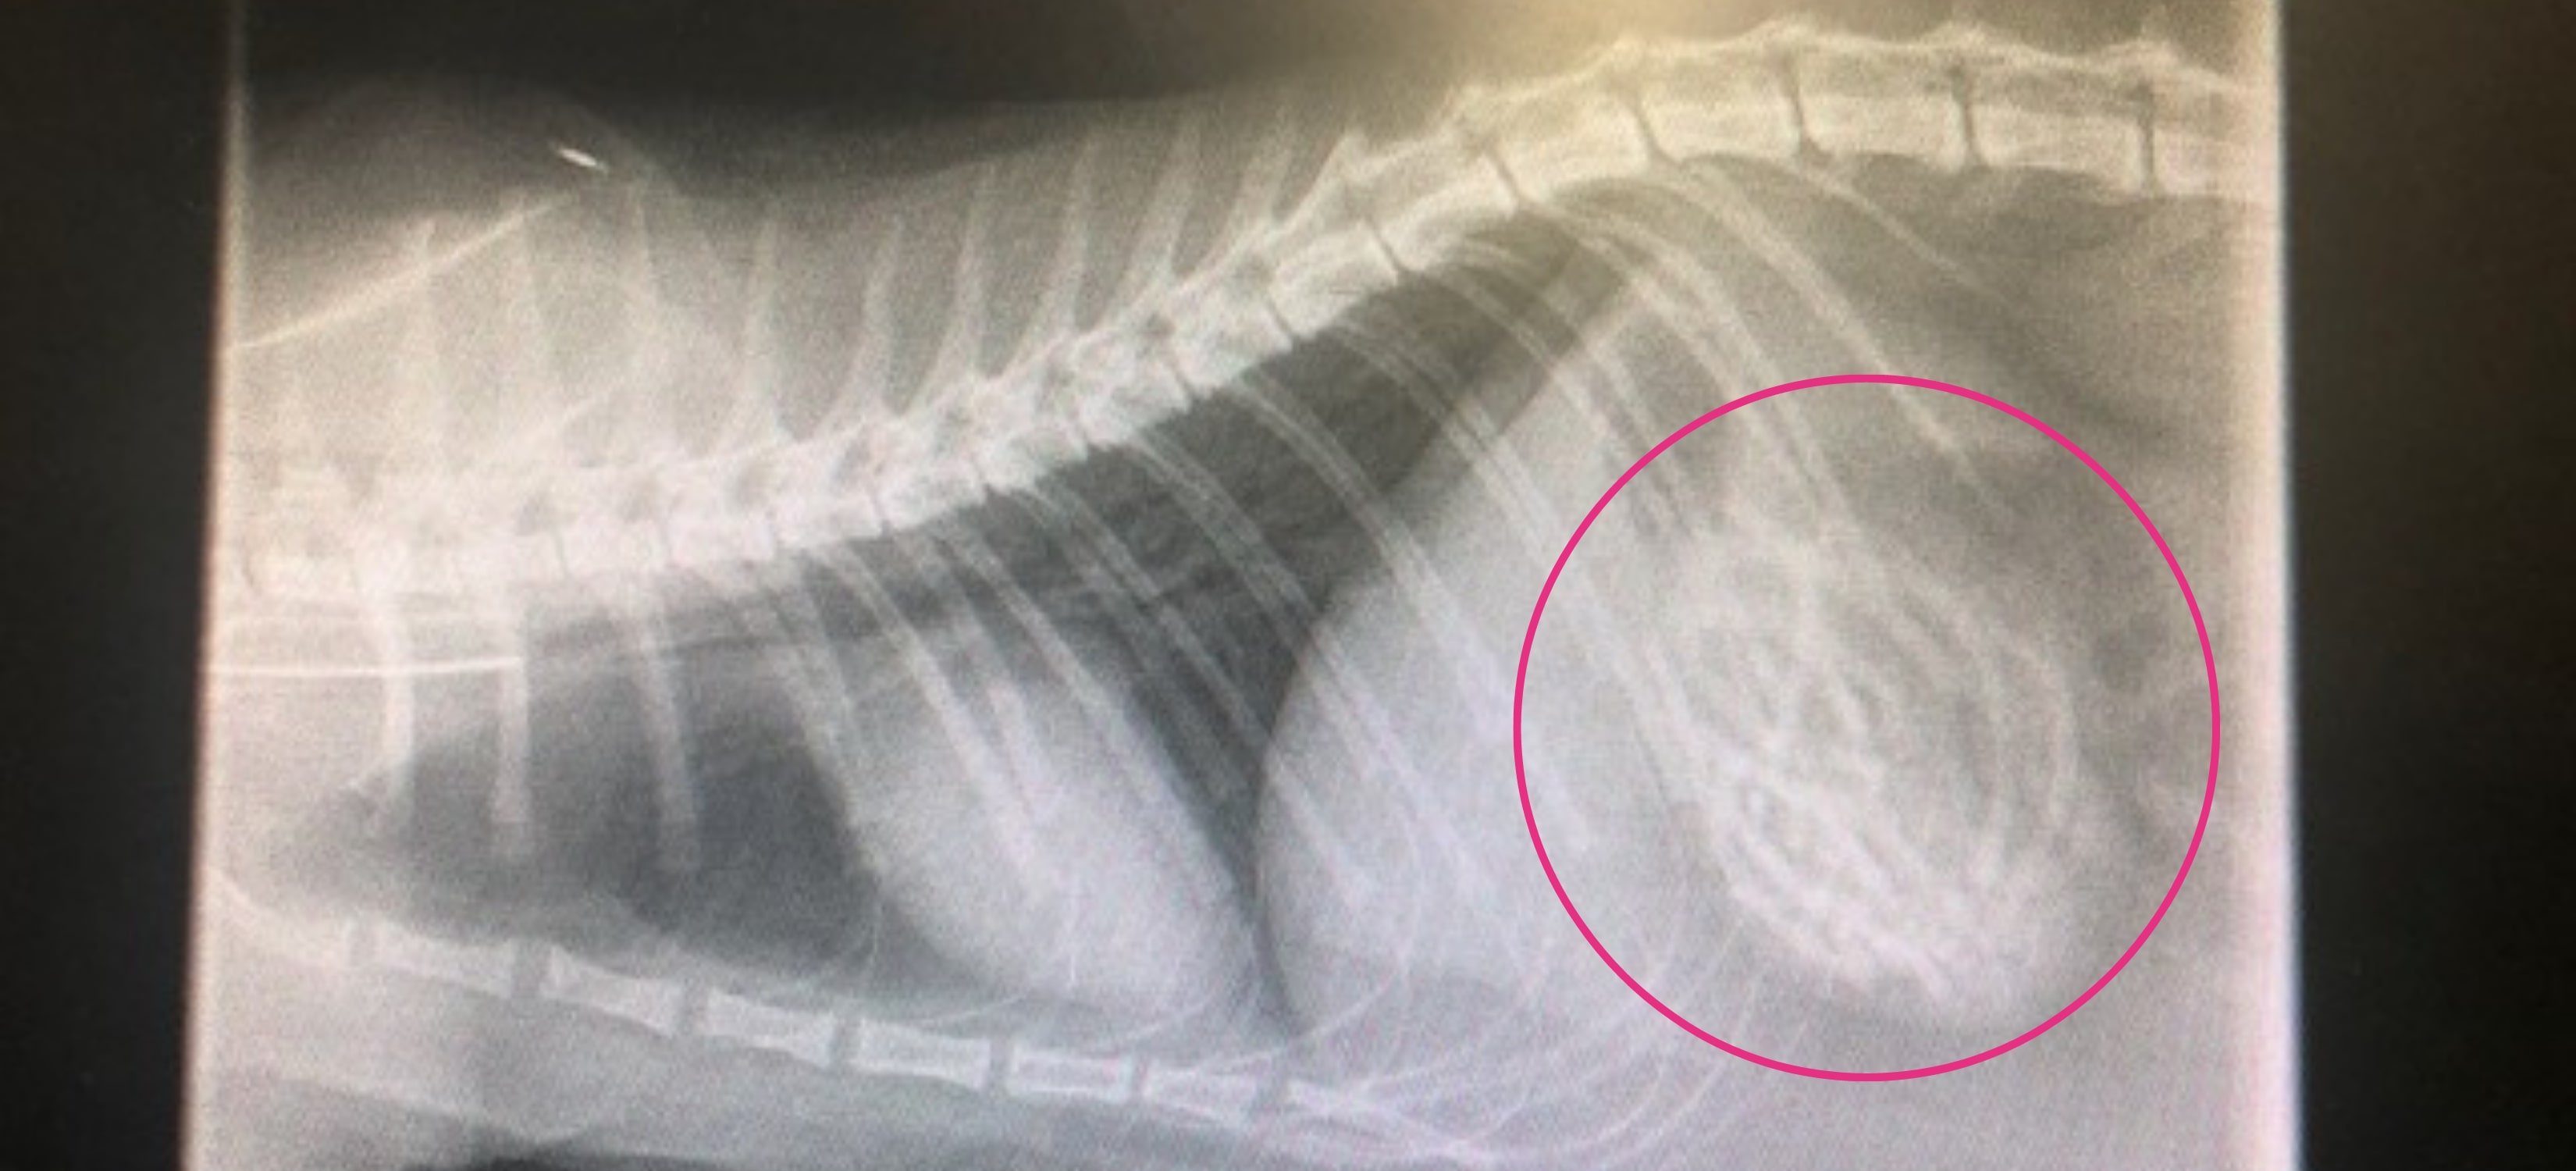 Xray showing the bundle of hairbands in Irwin's guts